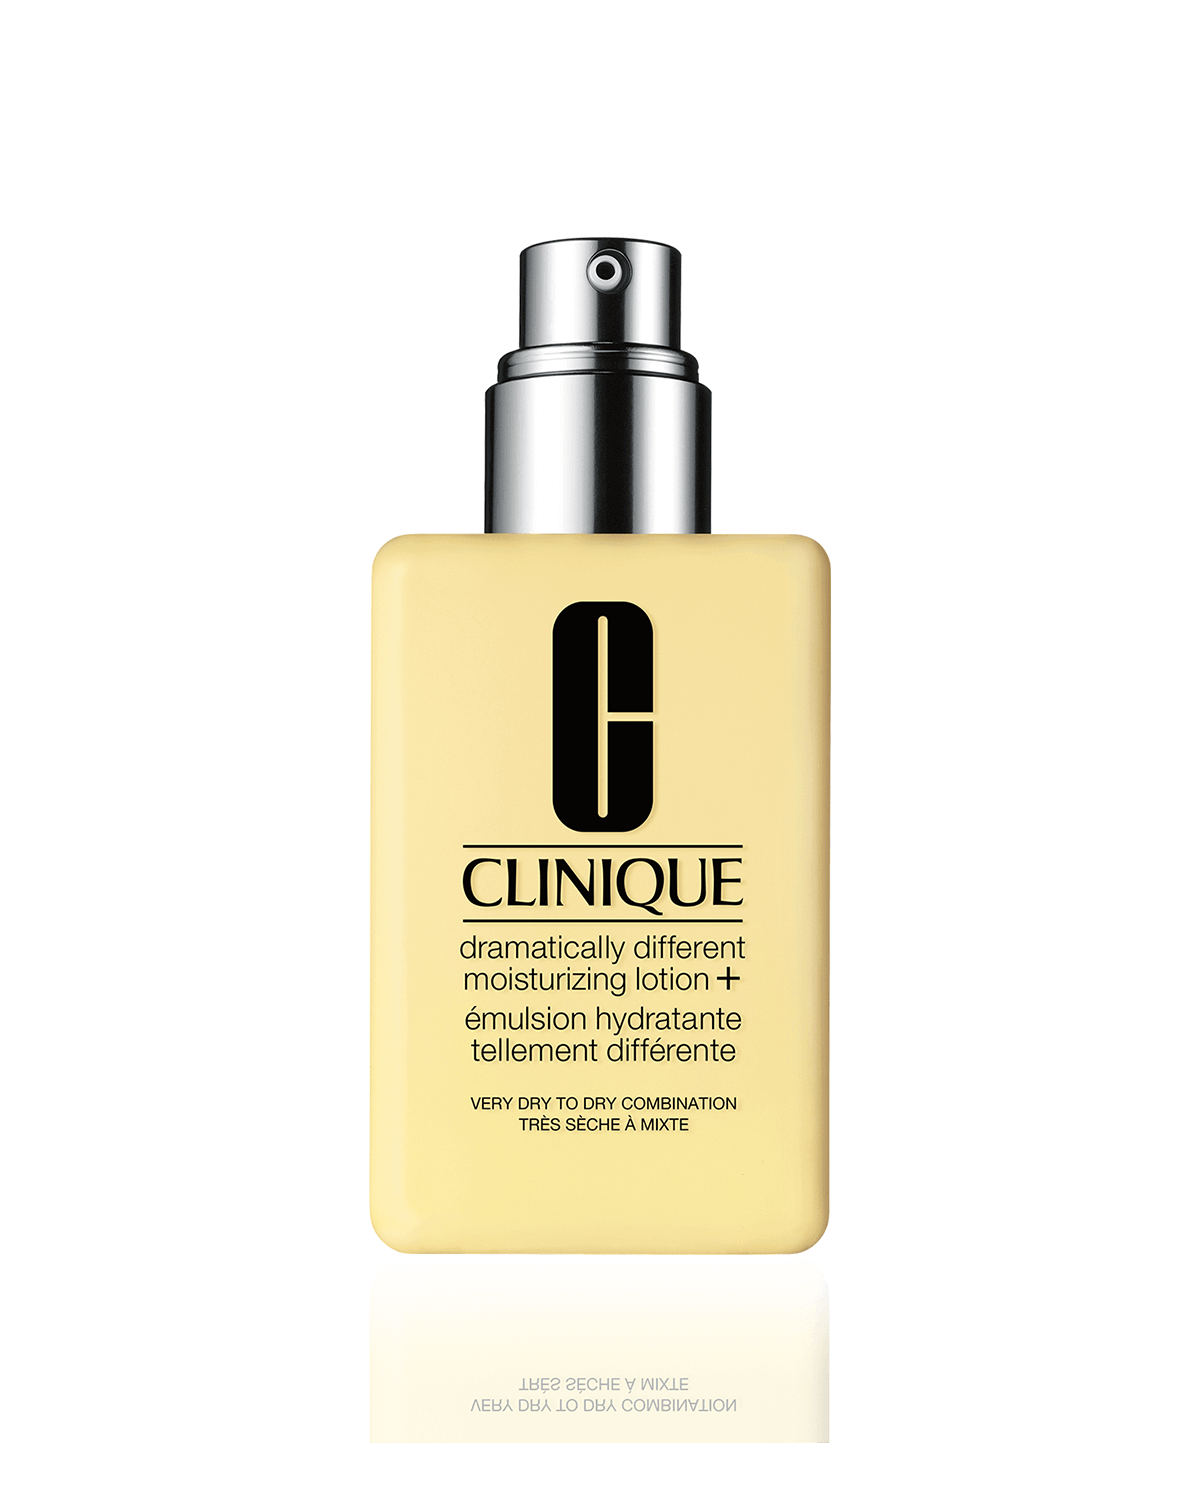 Dramatically Clinique Moisturizing | Lotion+ Different™